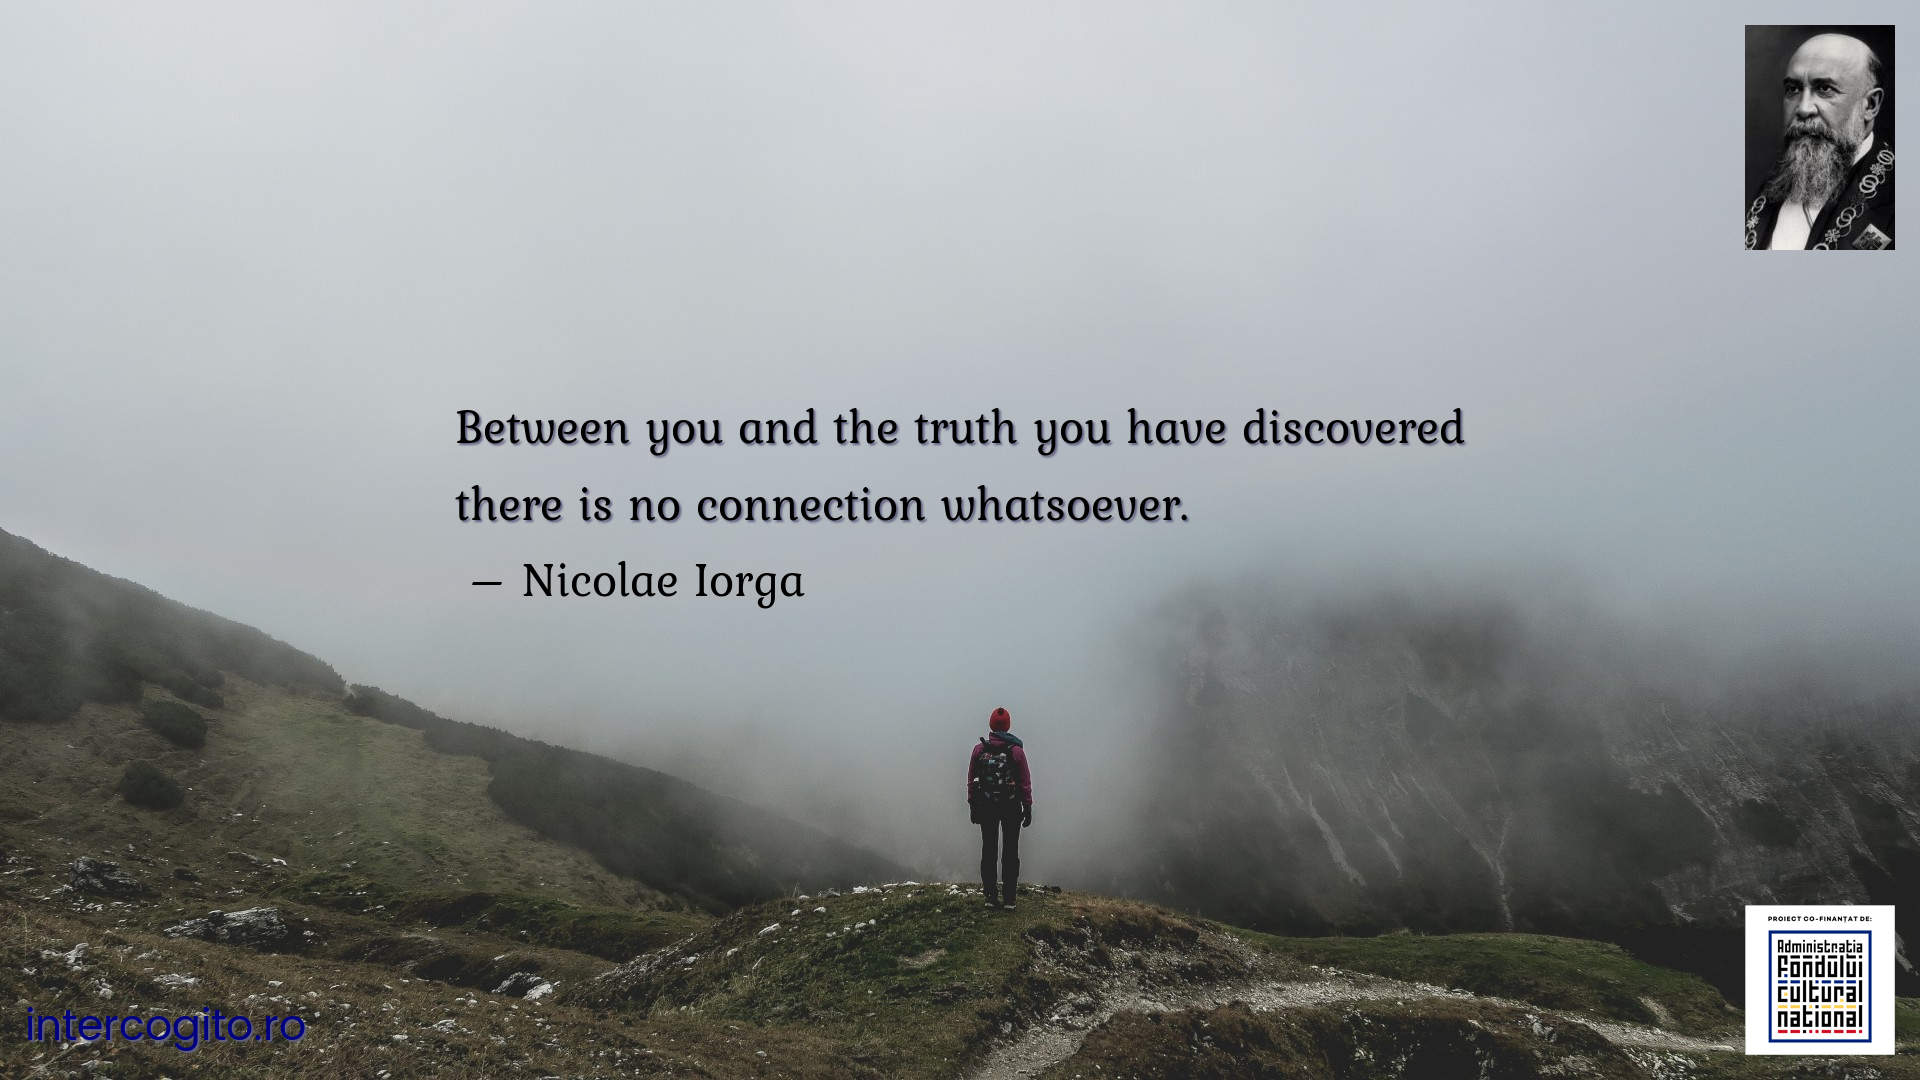 Between you and the truth you have discovered there is no connection whatsoever.